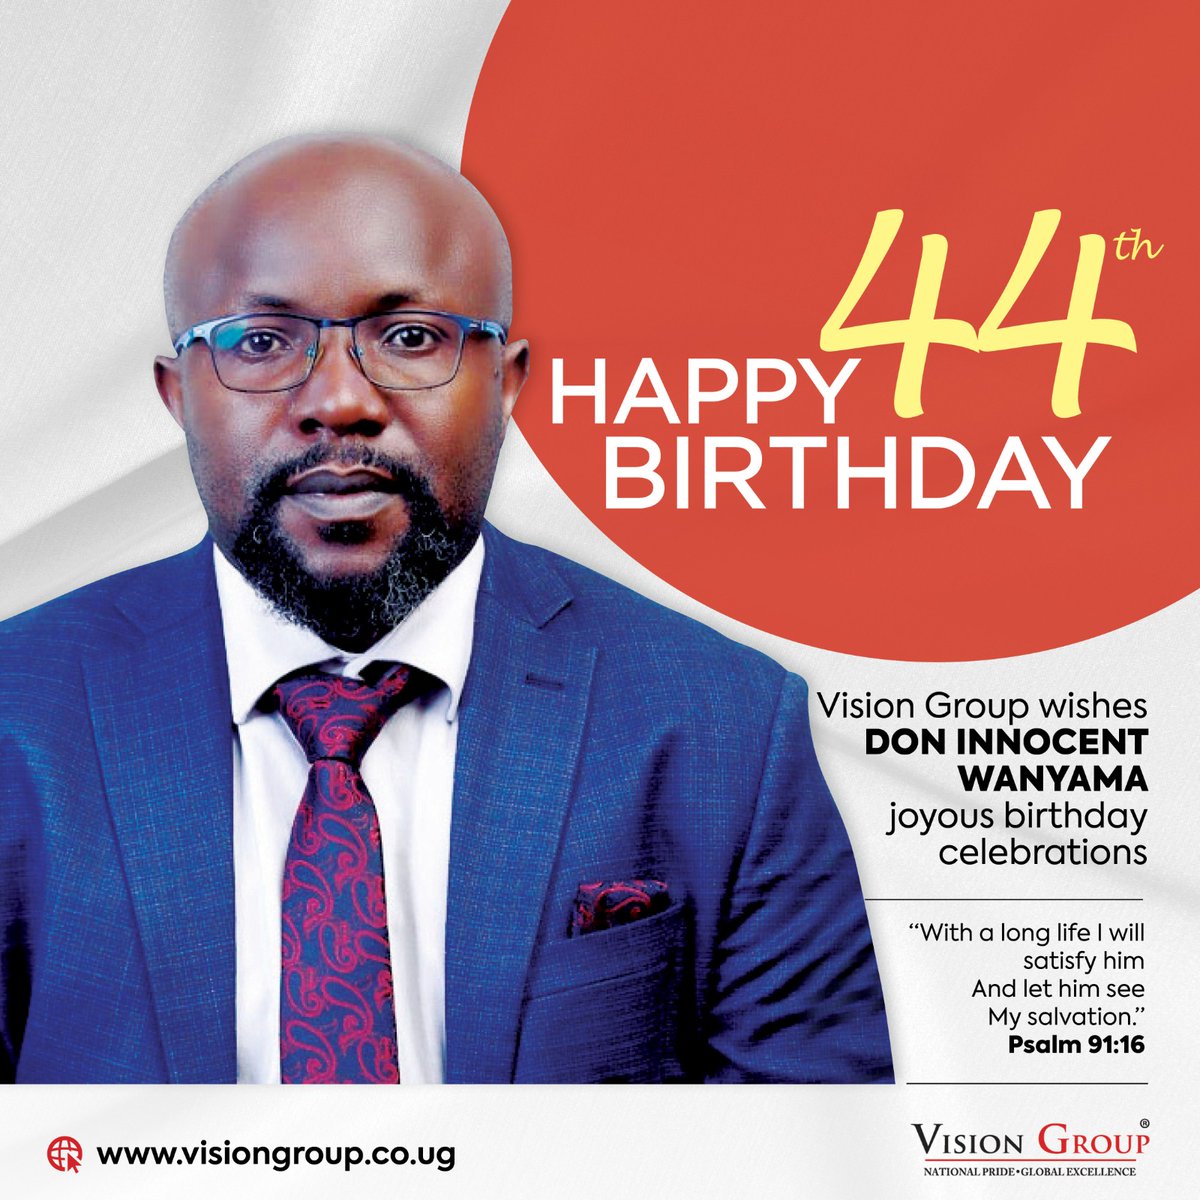 Our dear CEO @nyamadon, We (@VisionGroup family) wish you a Happy 44th Birthday! 🎂🥳🎈 #VisionGroup